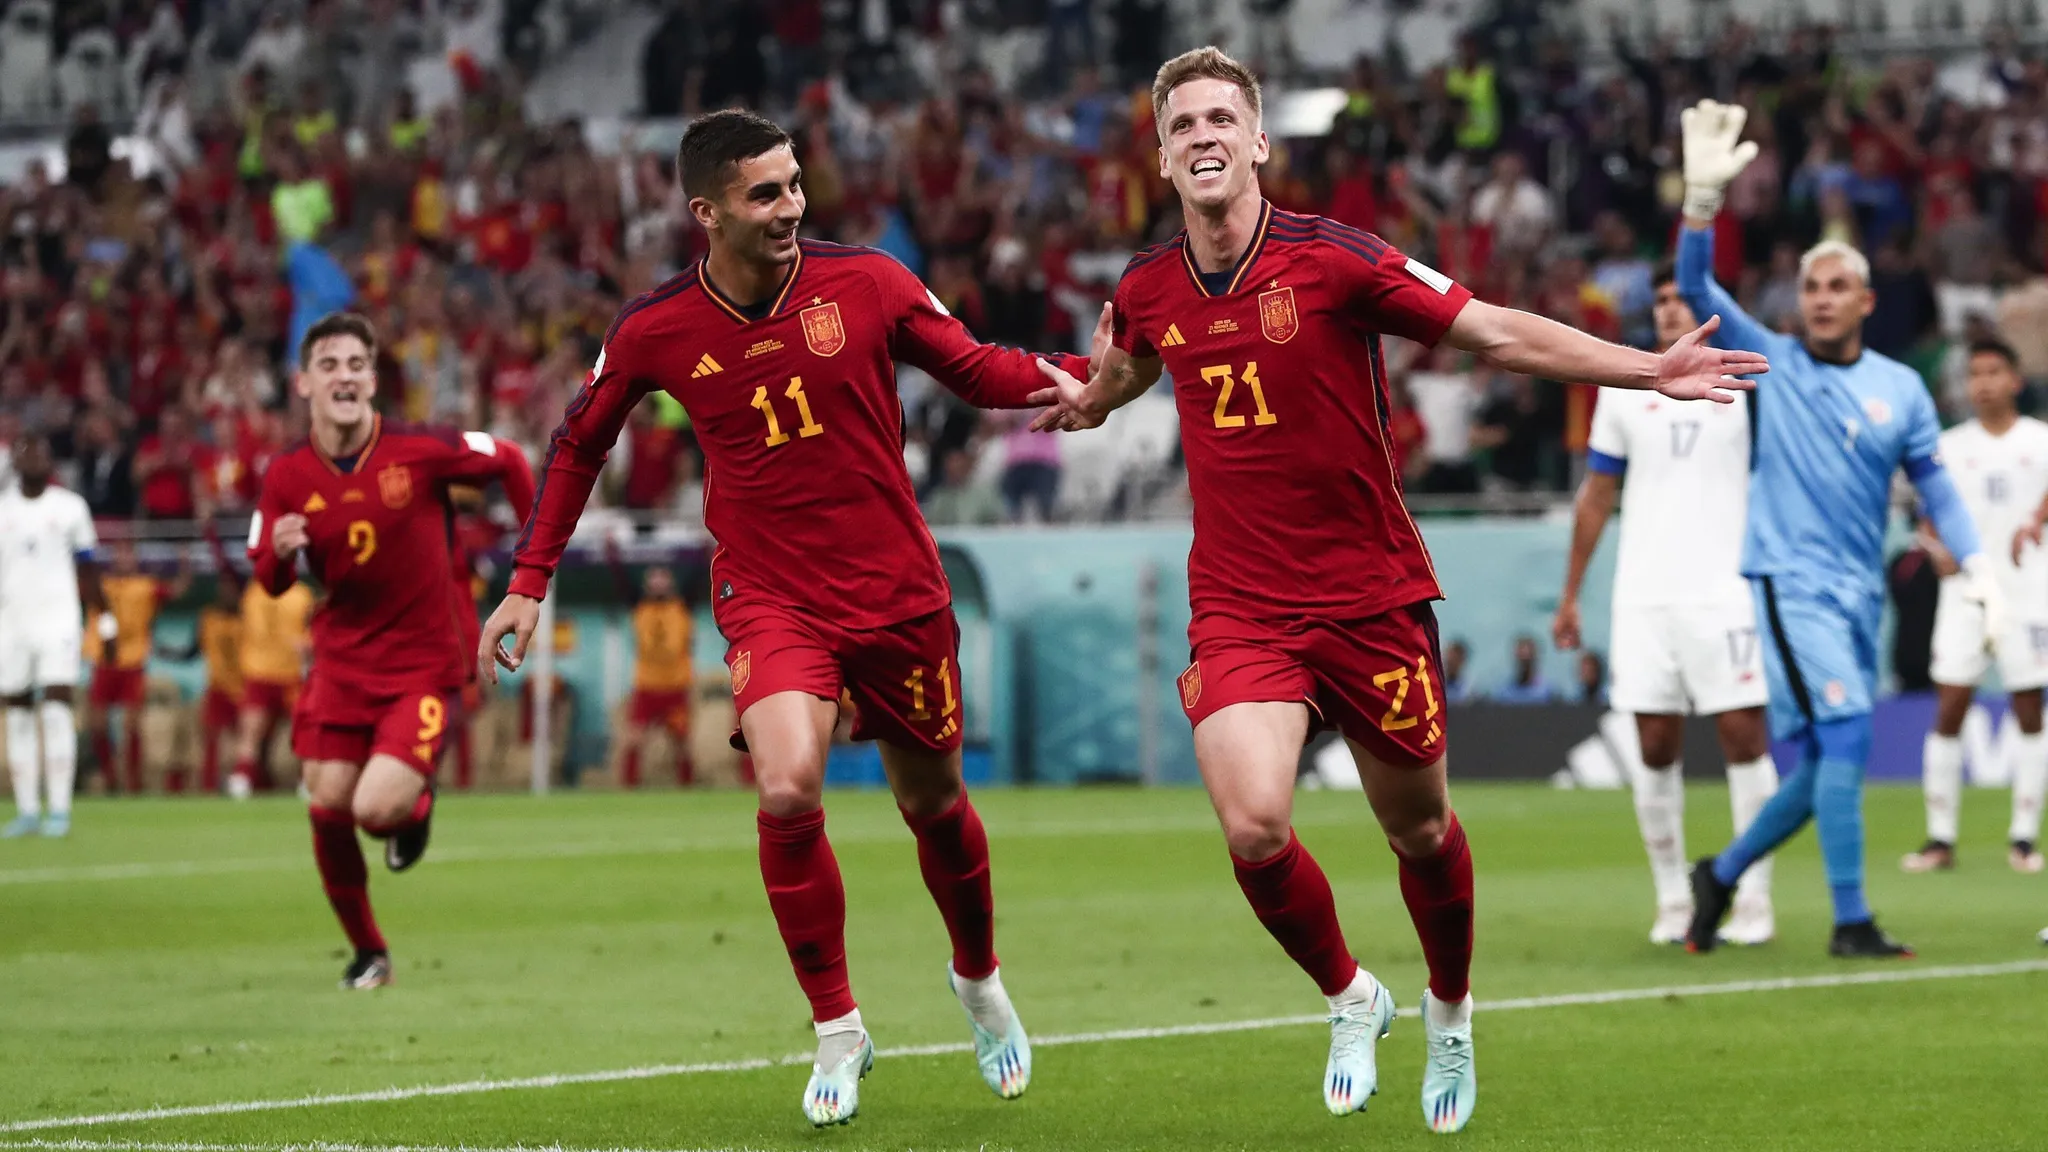 Dani Olmo scored Spain's 100th World Cup goal at the World Cup in Qatar.